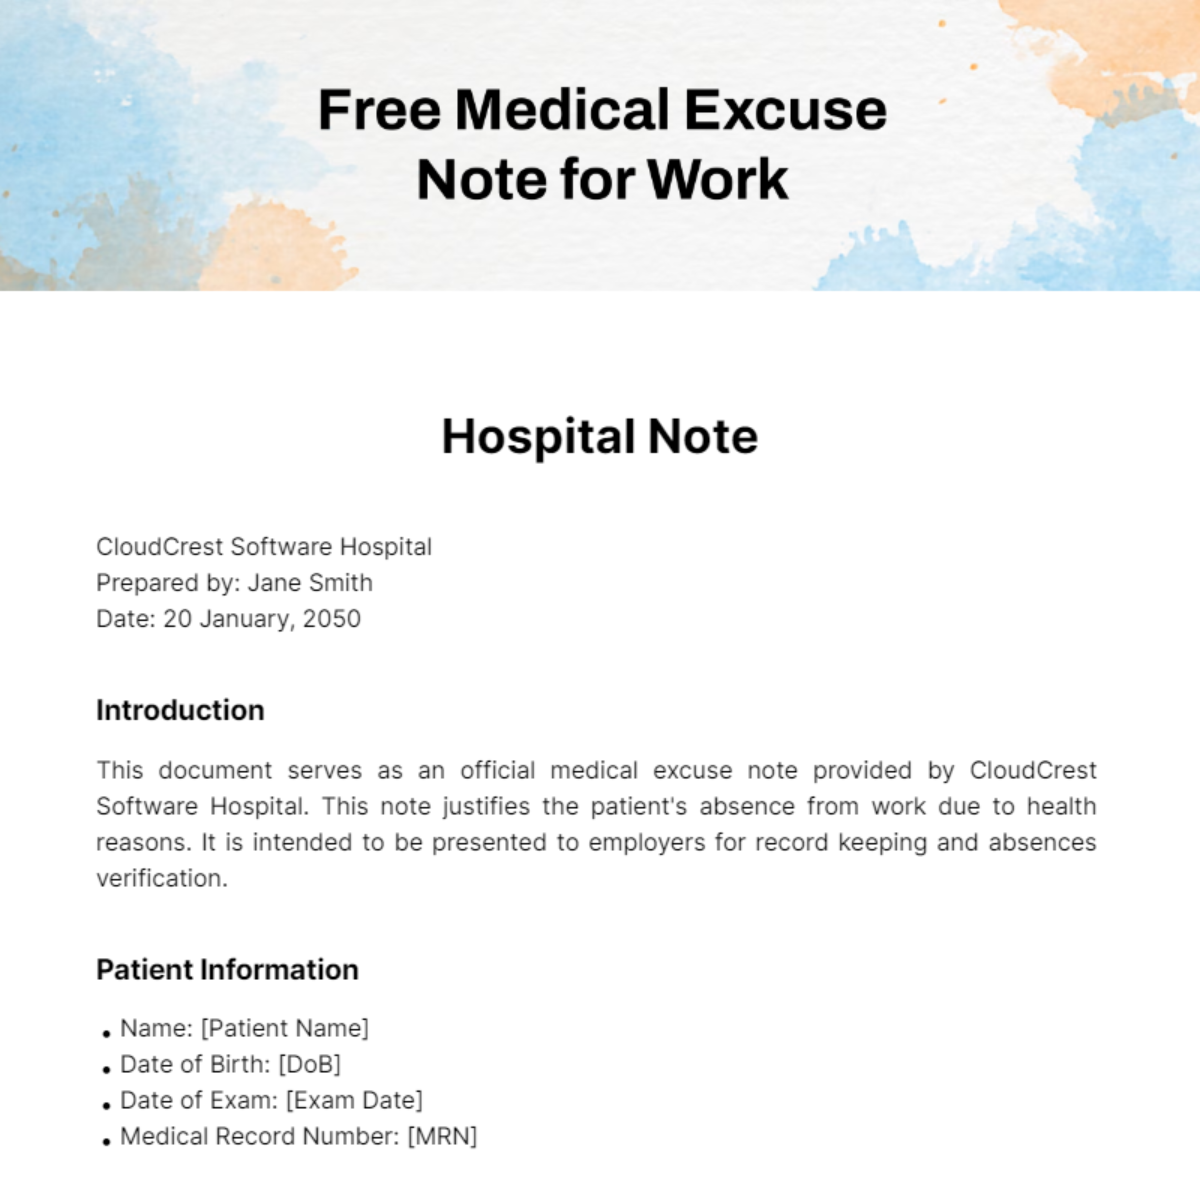 Medical Excuse Note for Work Template